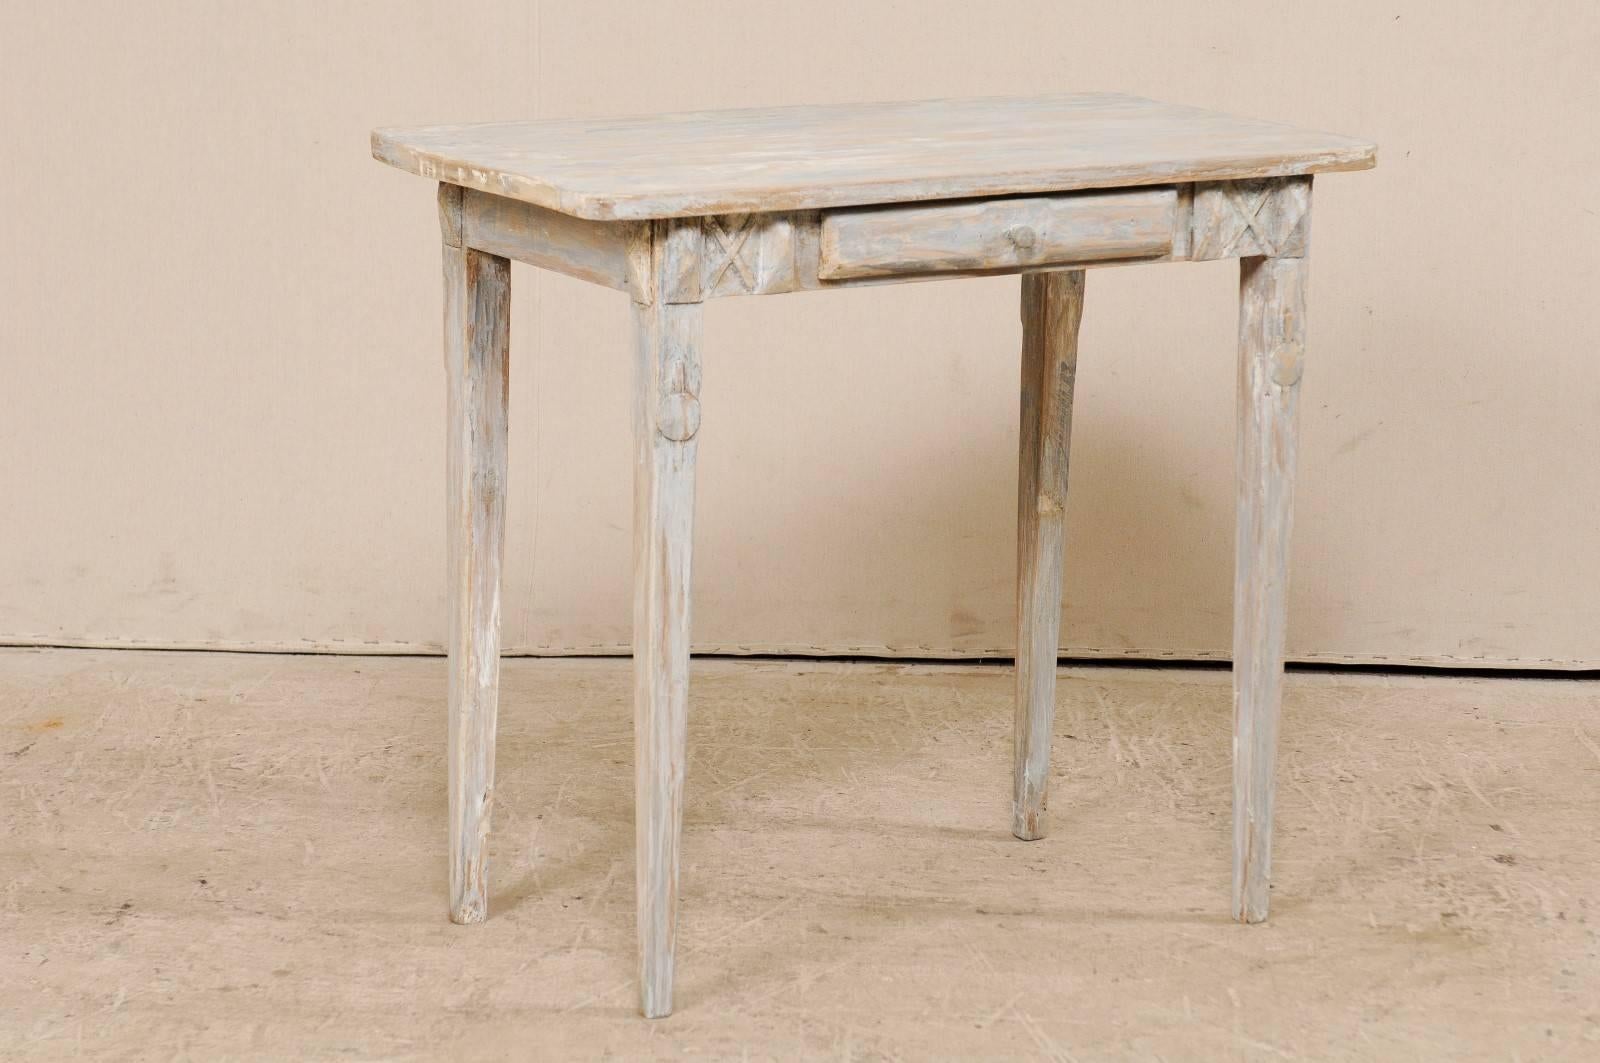 Carved Swedish Period Gustavian, 19th Century Painted Wood Side Table with Drawer